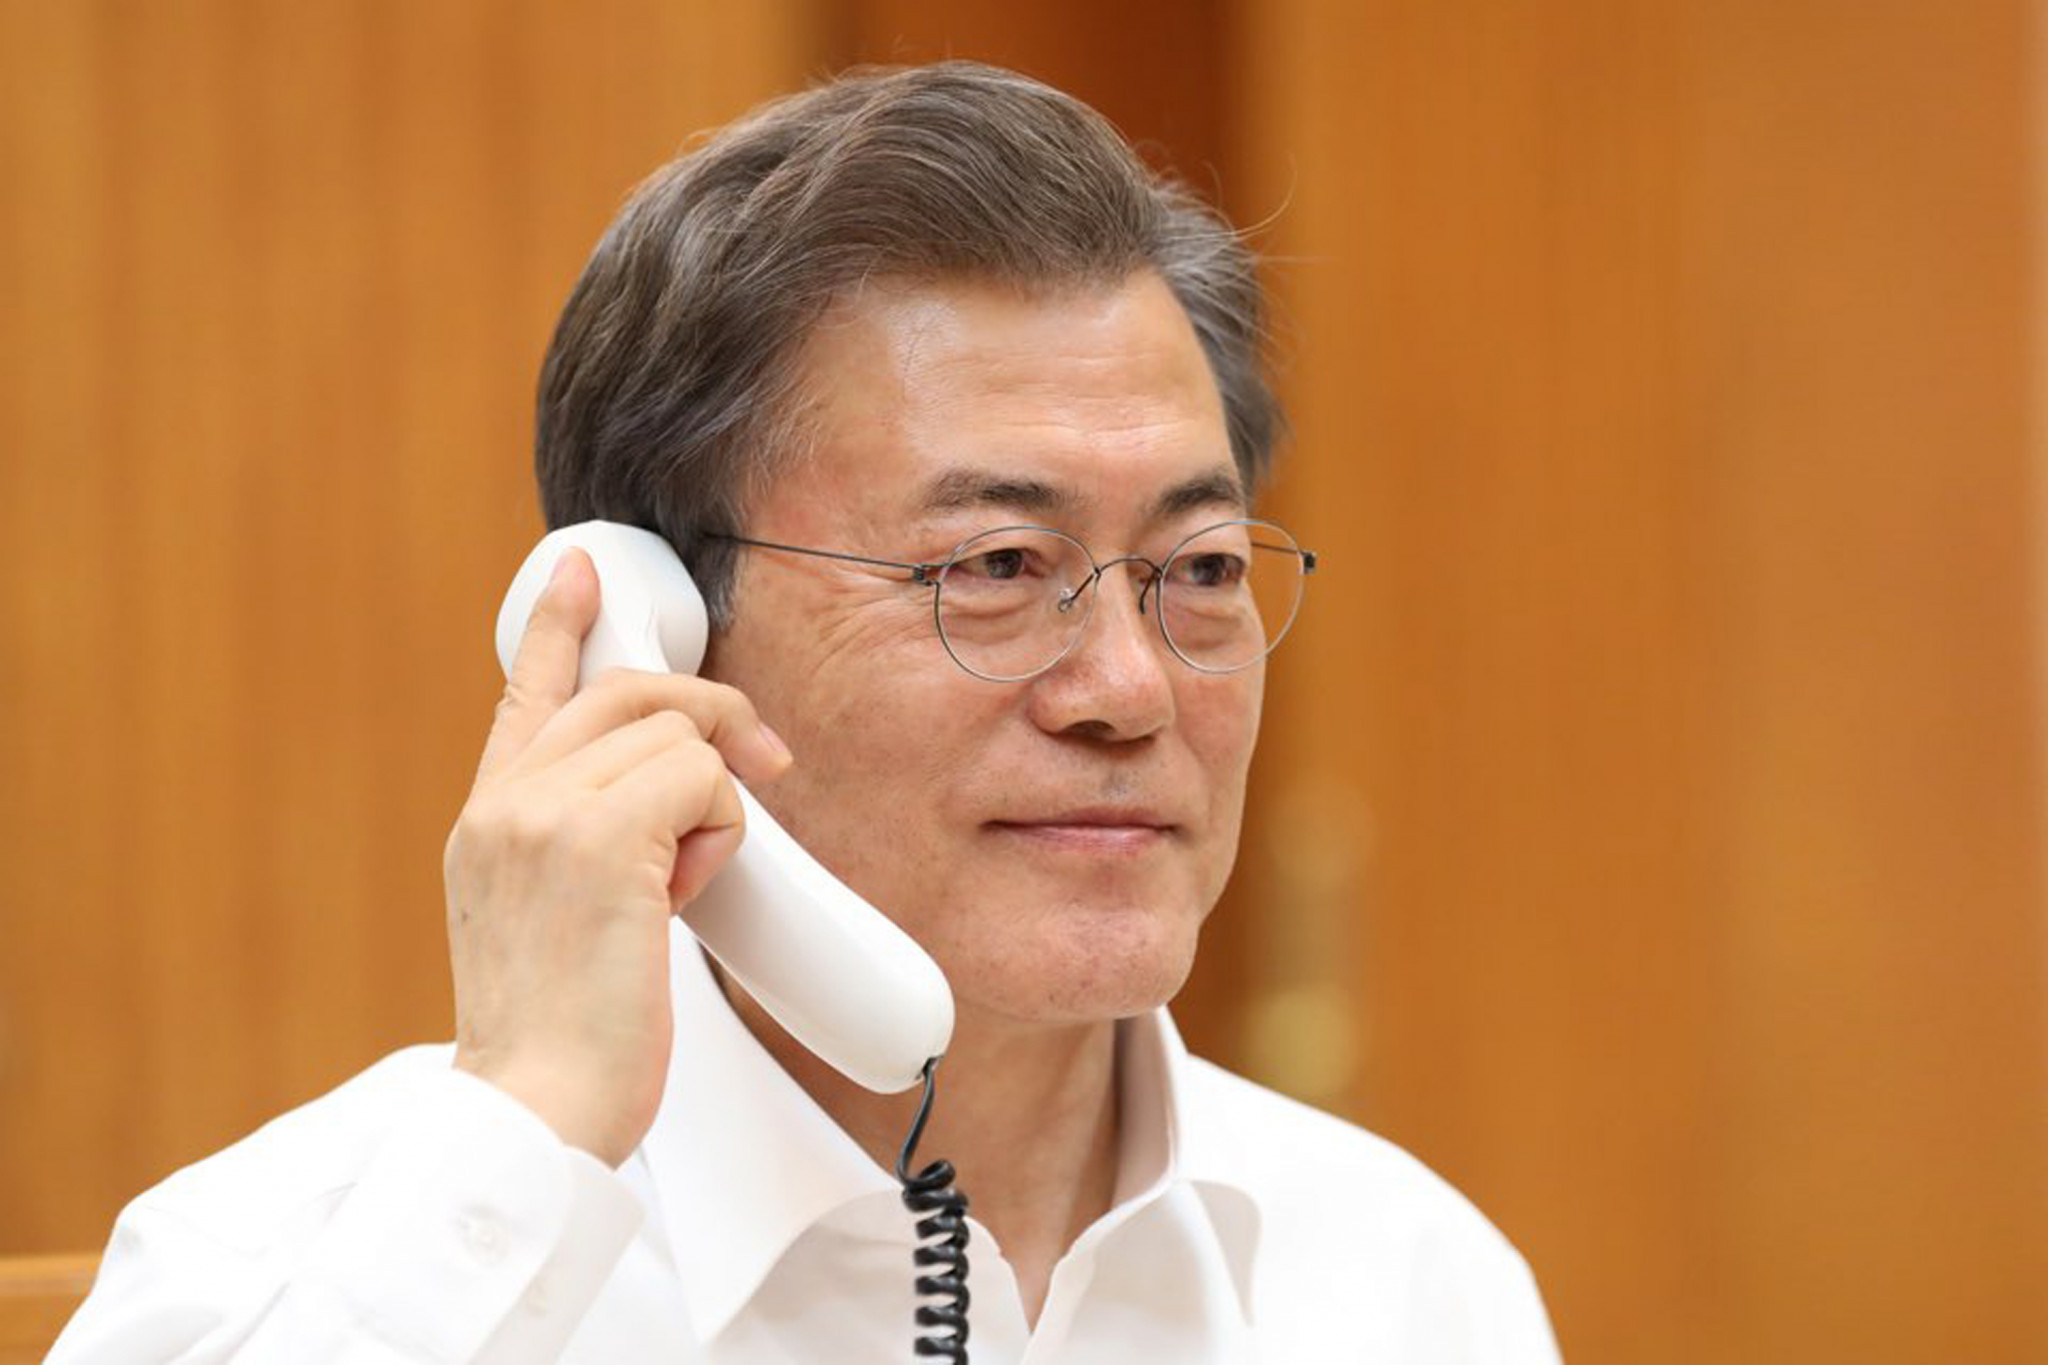 North Korea accepting the talks with South Korea came hours after President Moon Jae-in agreed to halt military exercises during the Games in a phone call with Donald Trump ©Getty Images